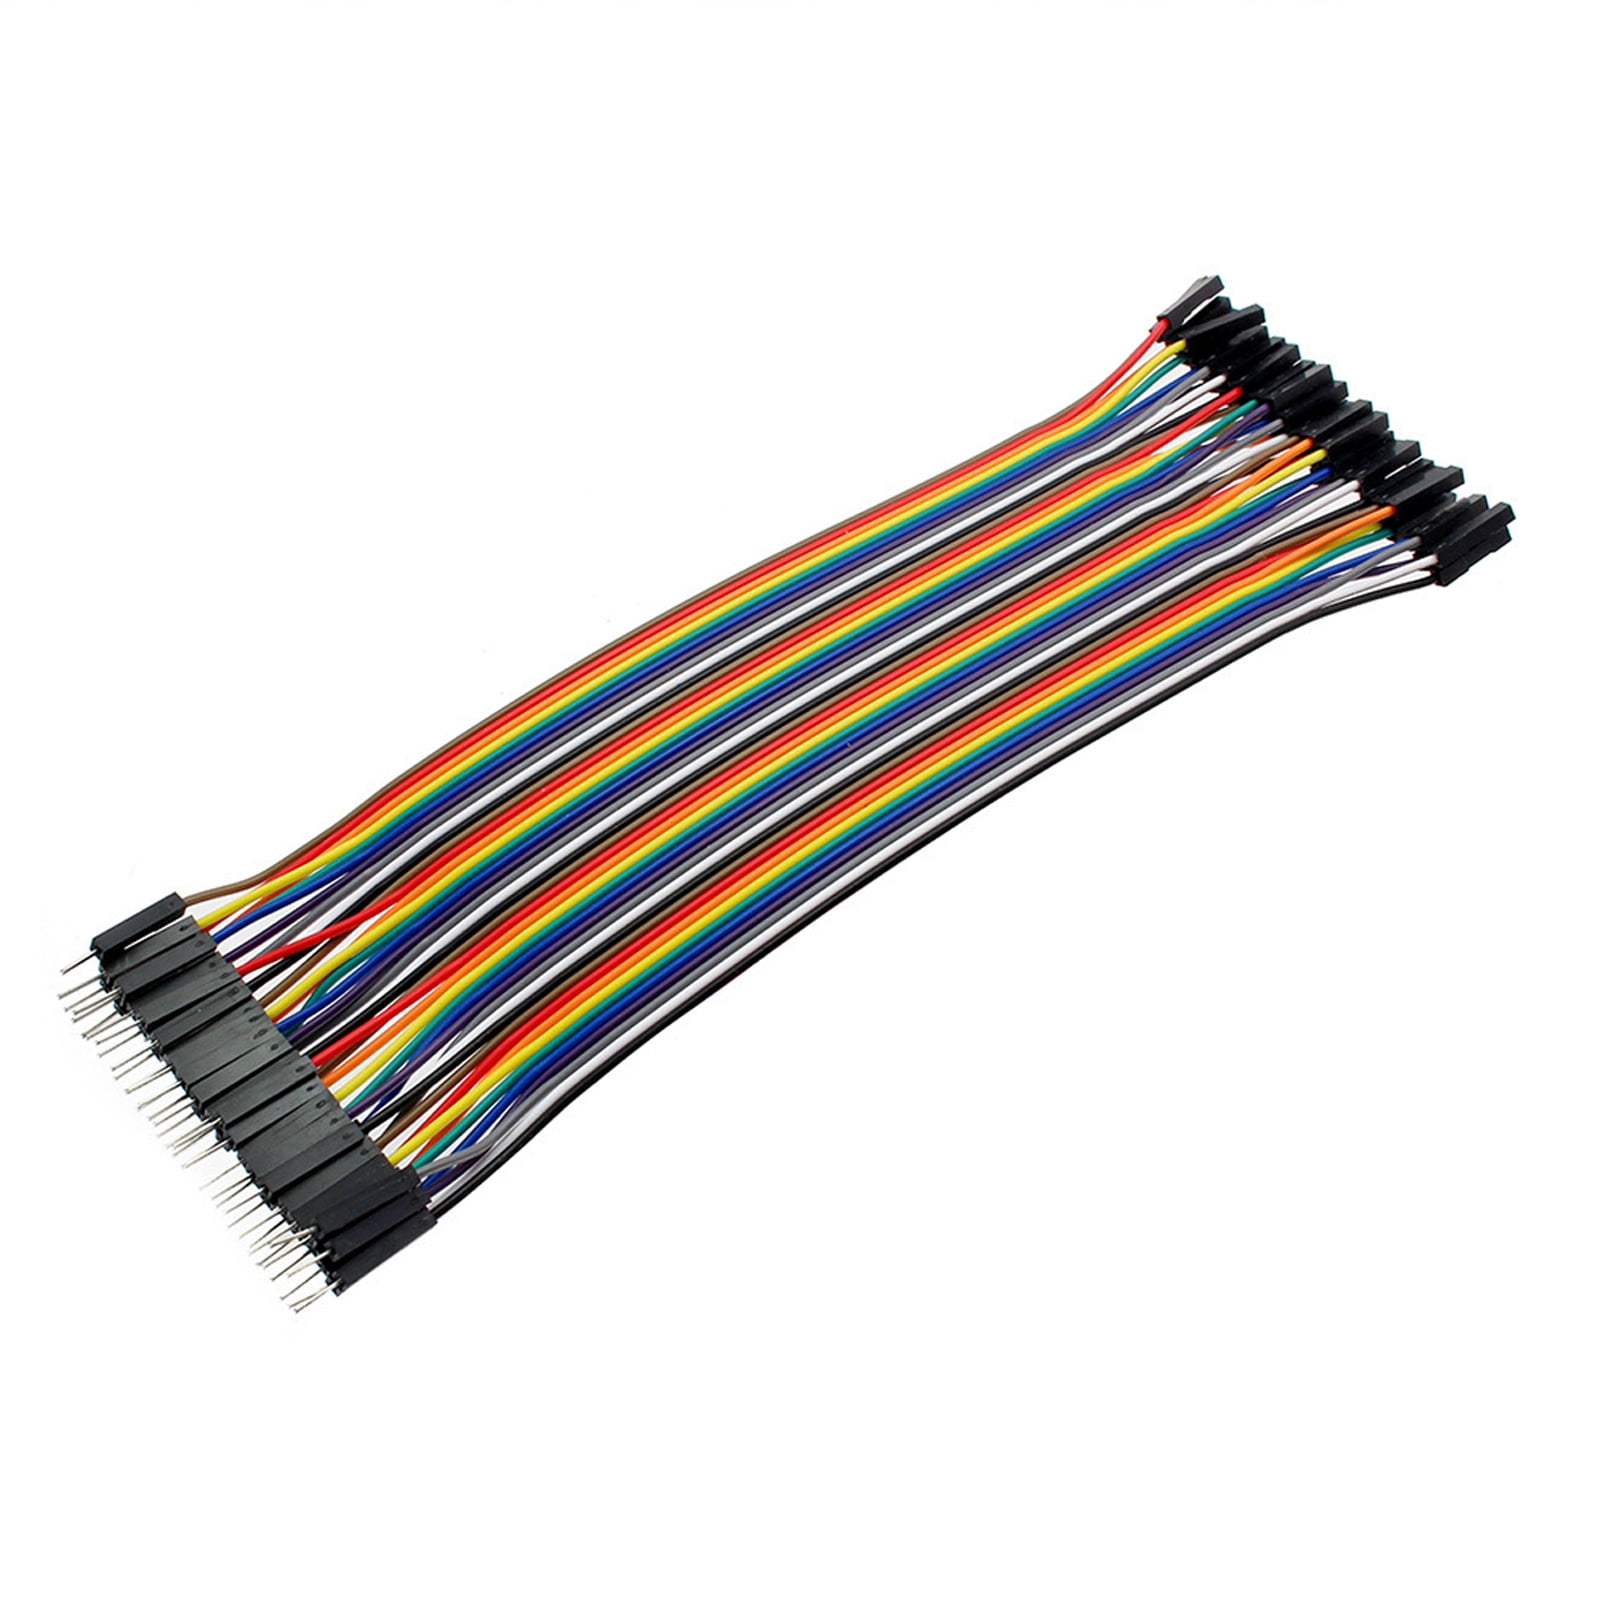 Details about   40P Pin 20cm Female to Female Dupont Wire Color Jumper Cable 2.54mm for Arduino 